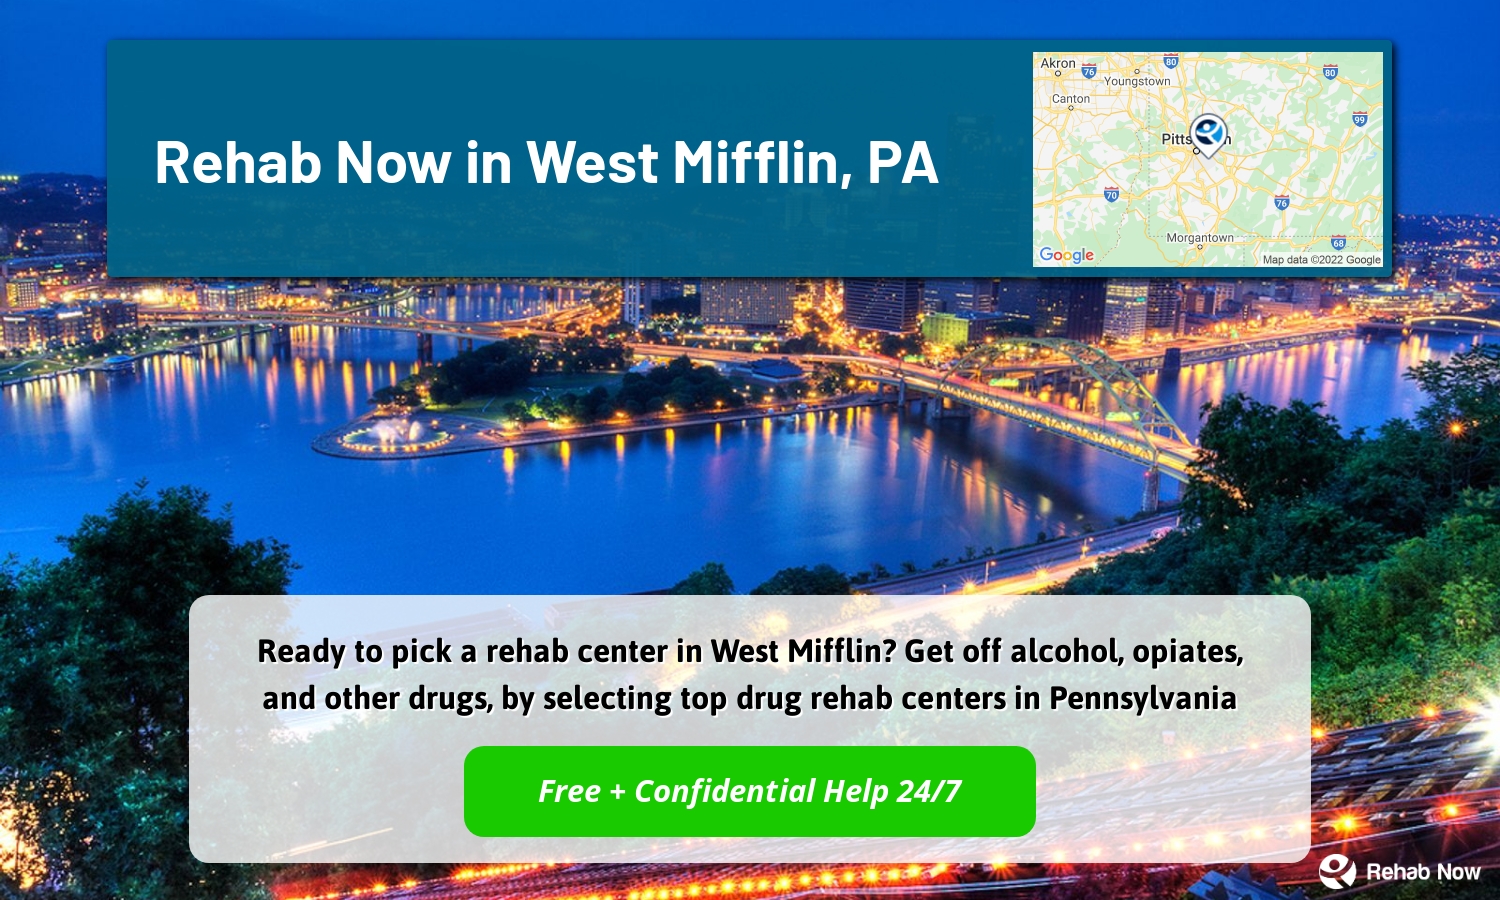 Ready to pick a rehab center in West Mifflin? Get off alcohol, opiates, and other drugs, by selecting top drug rehab centers in Pennsylvania